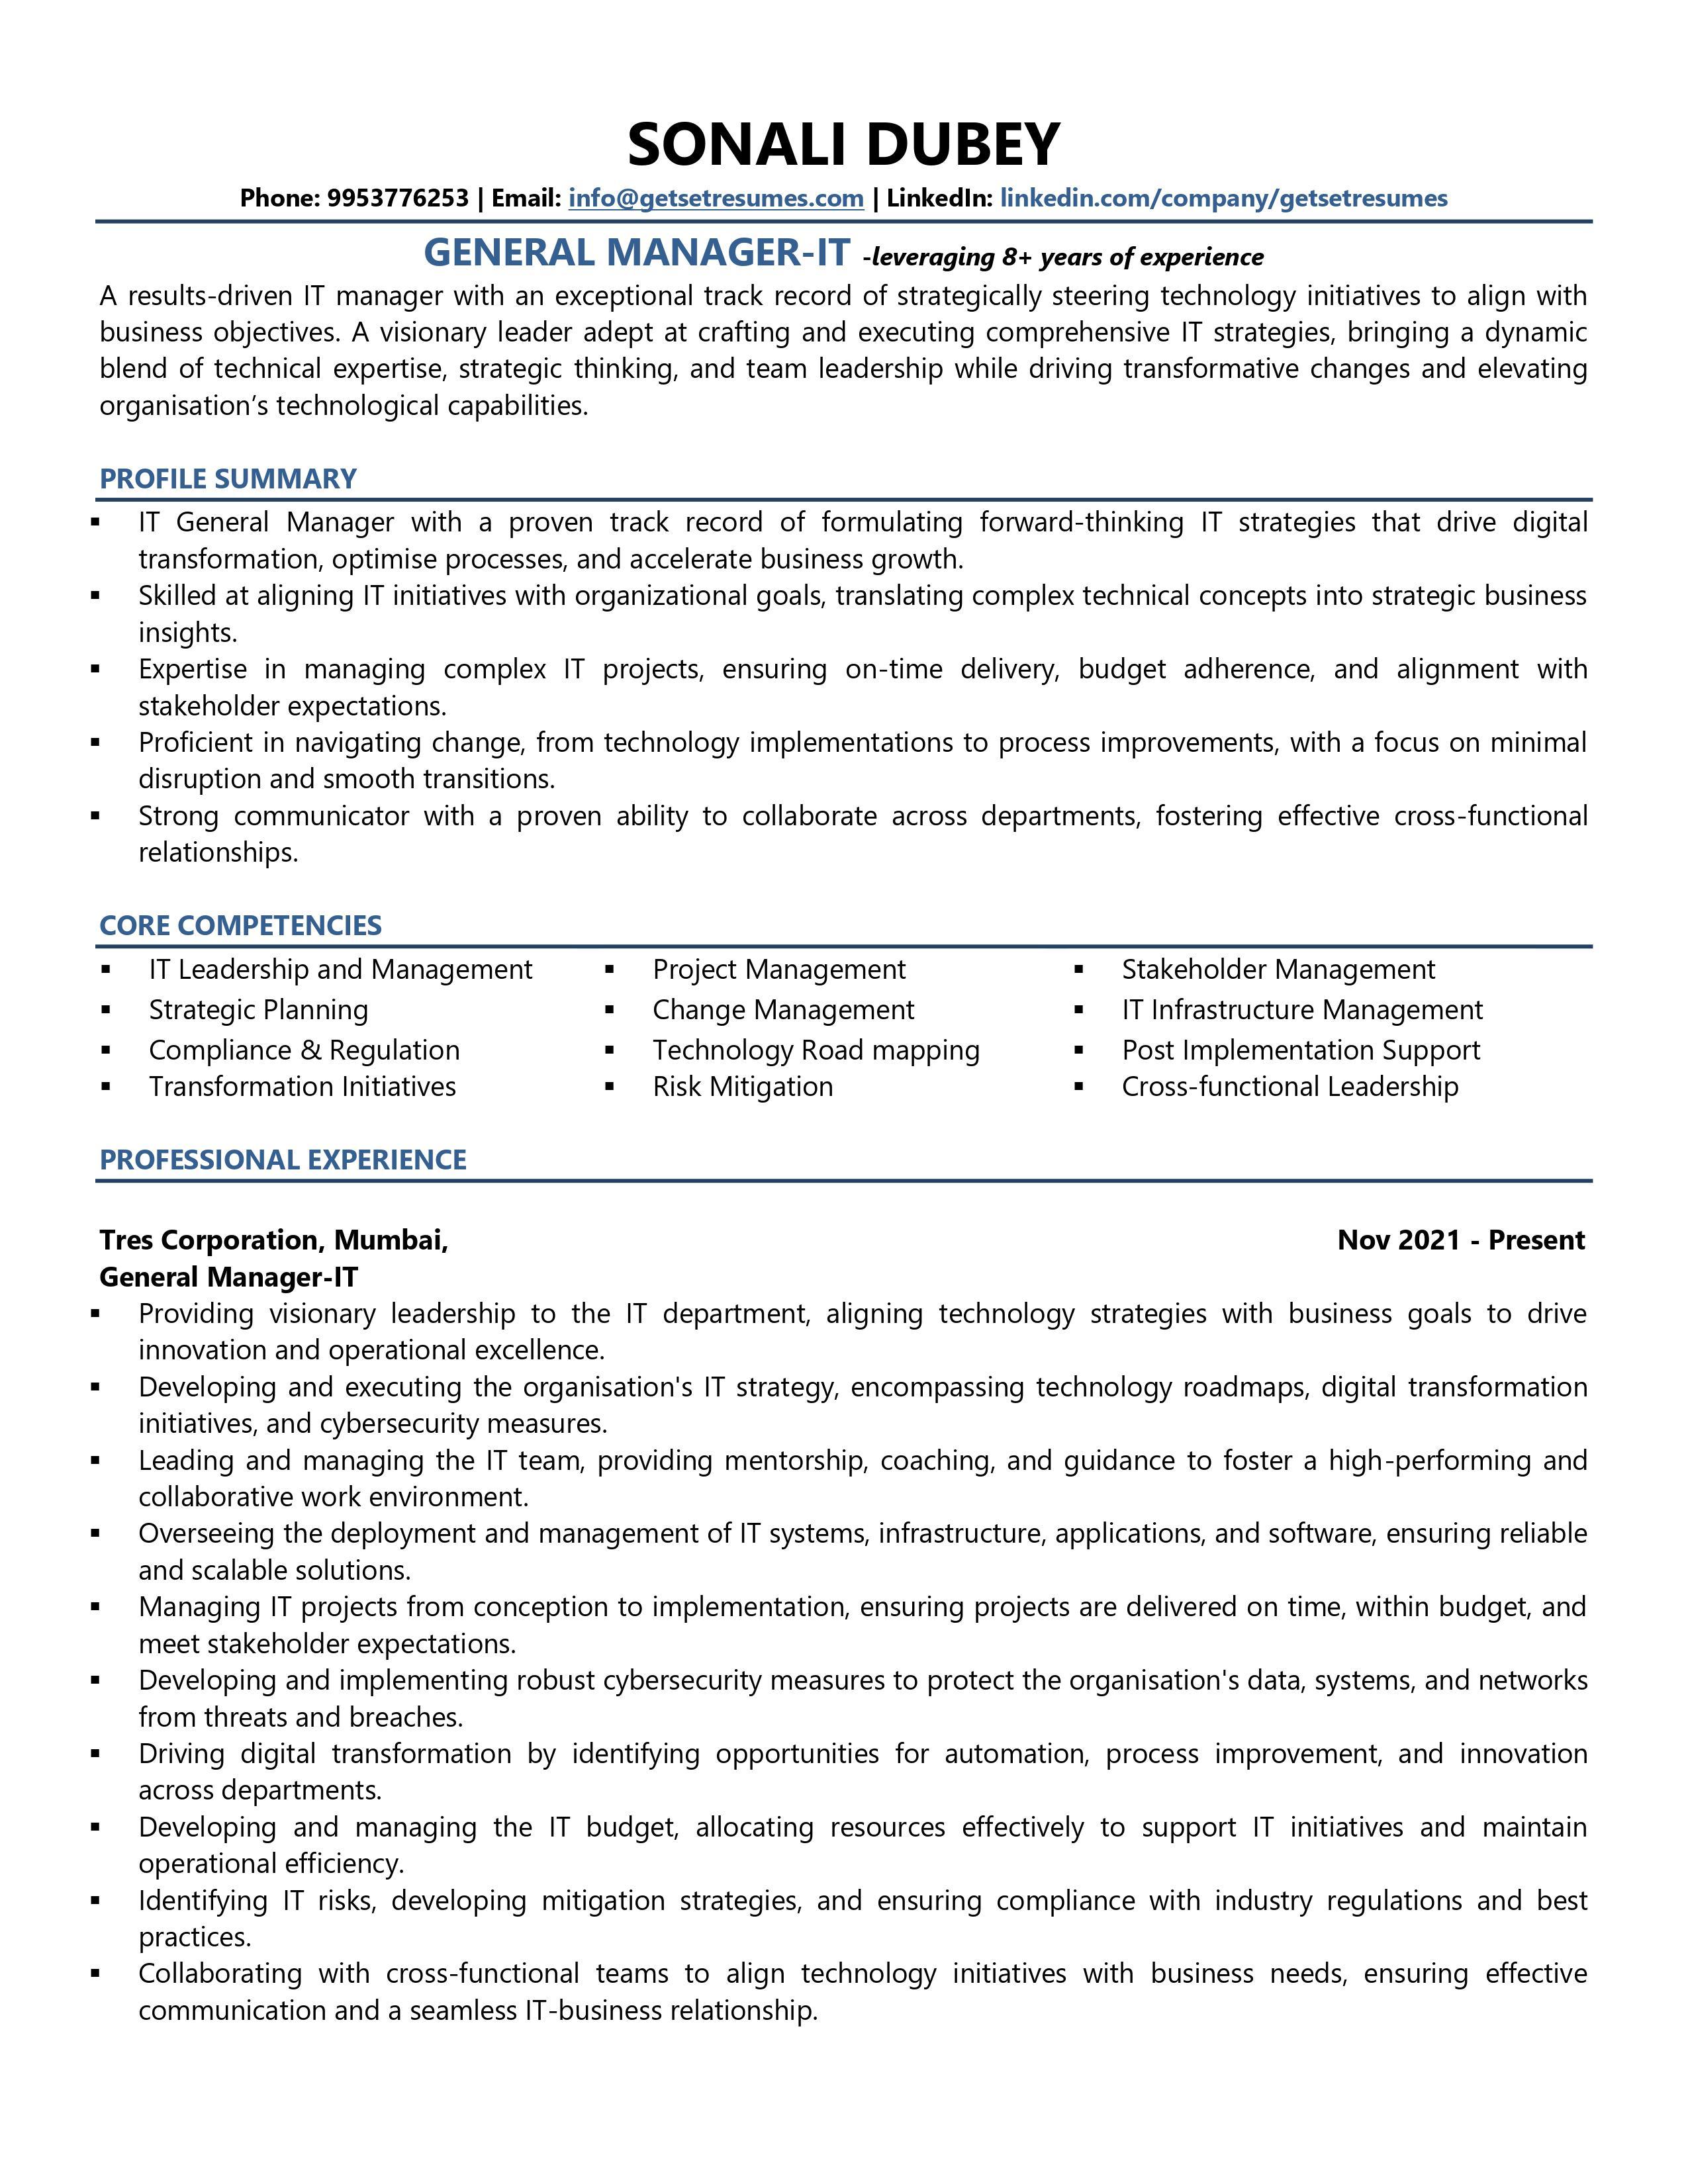 General Manager IT - Resume Example & Template